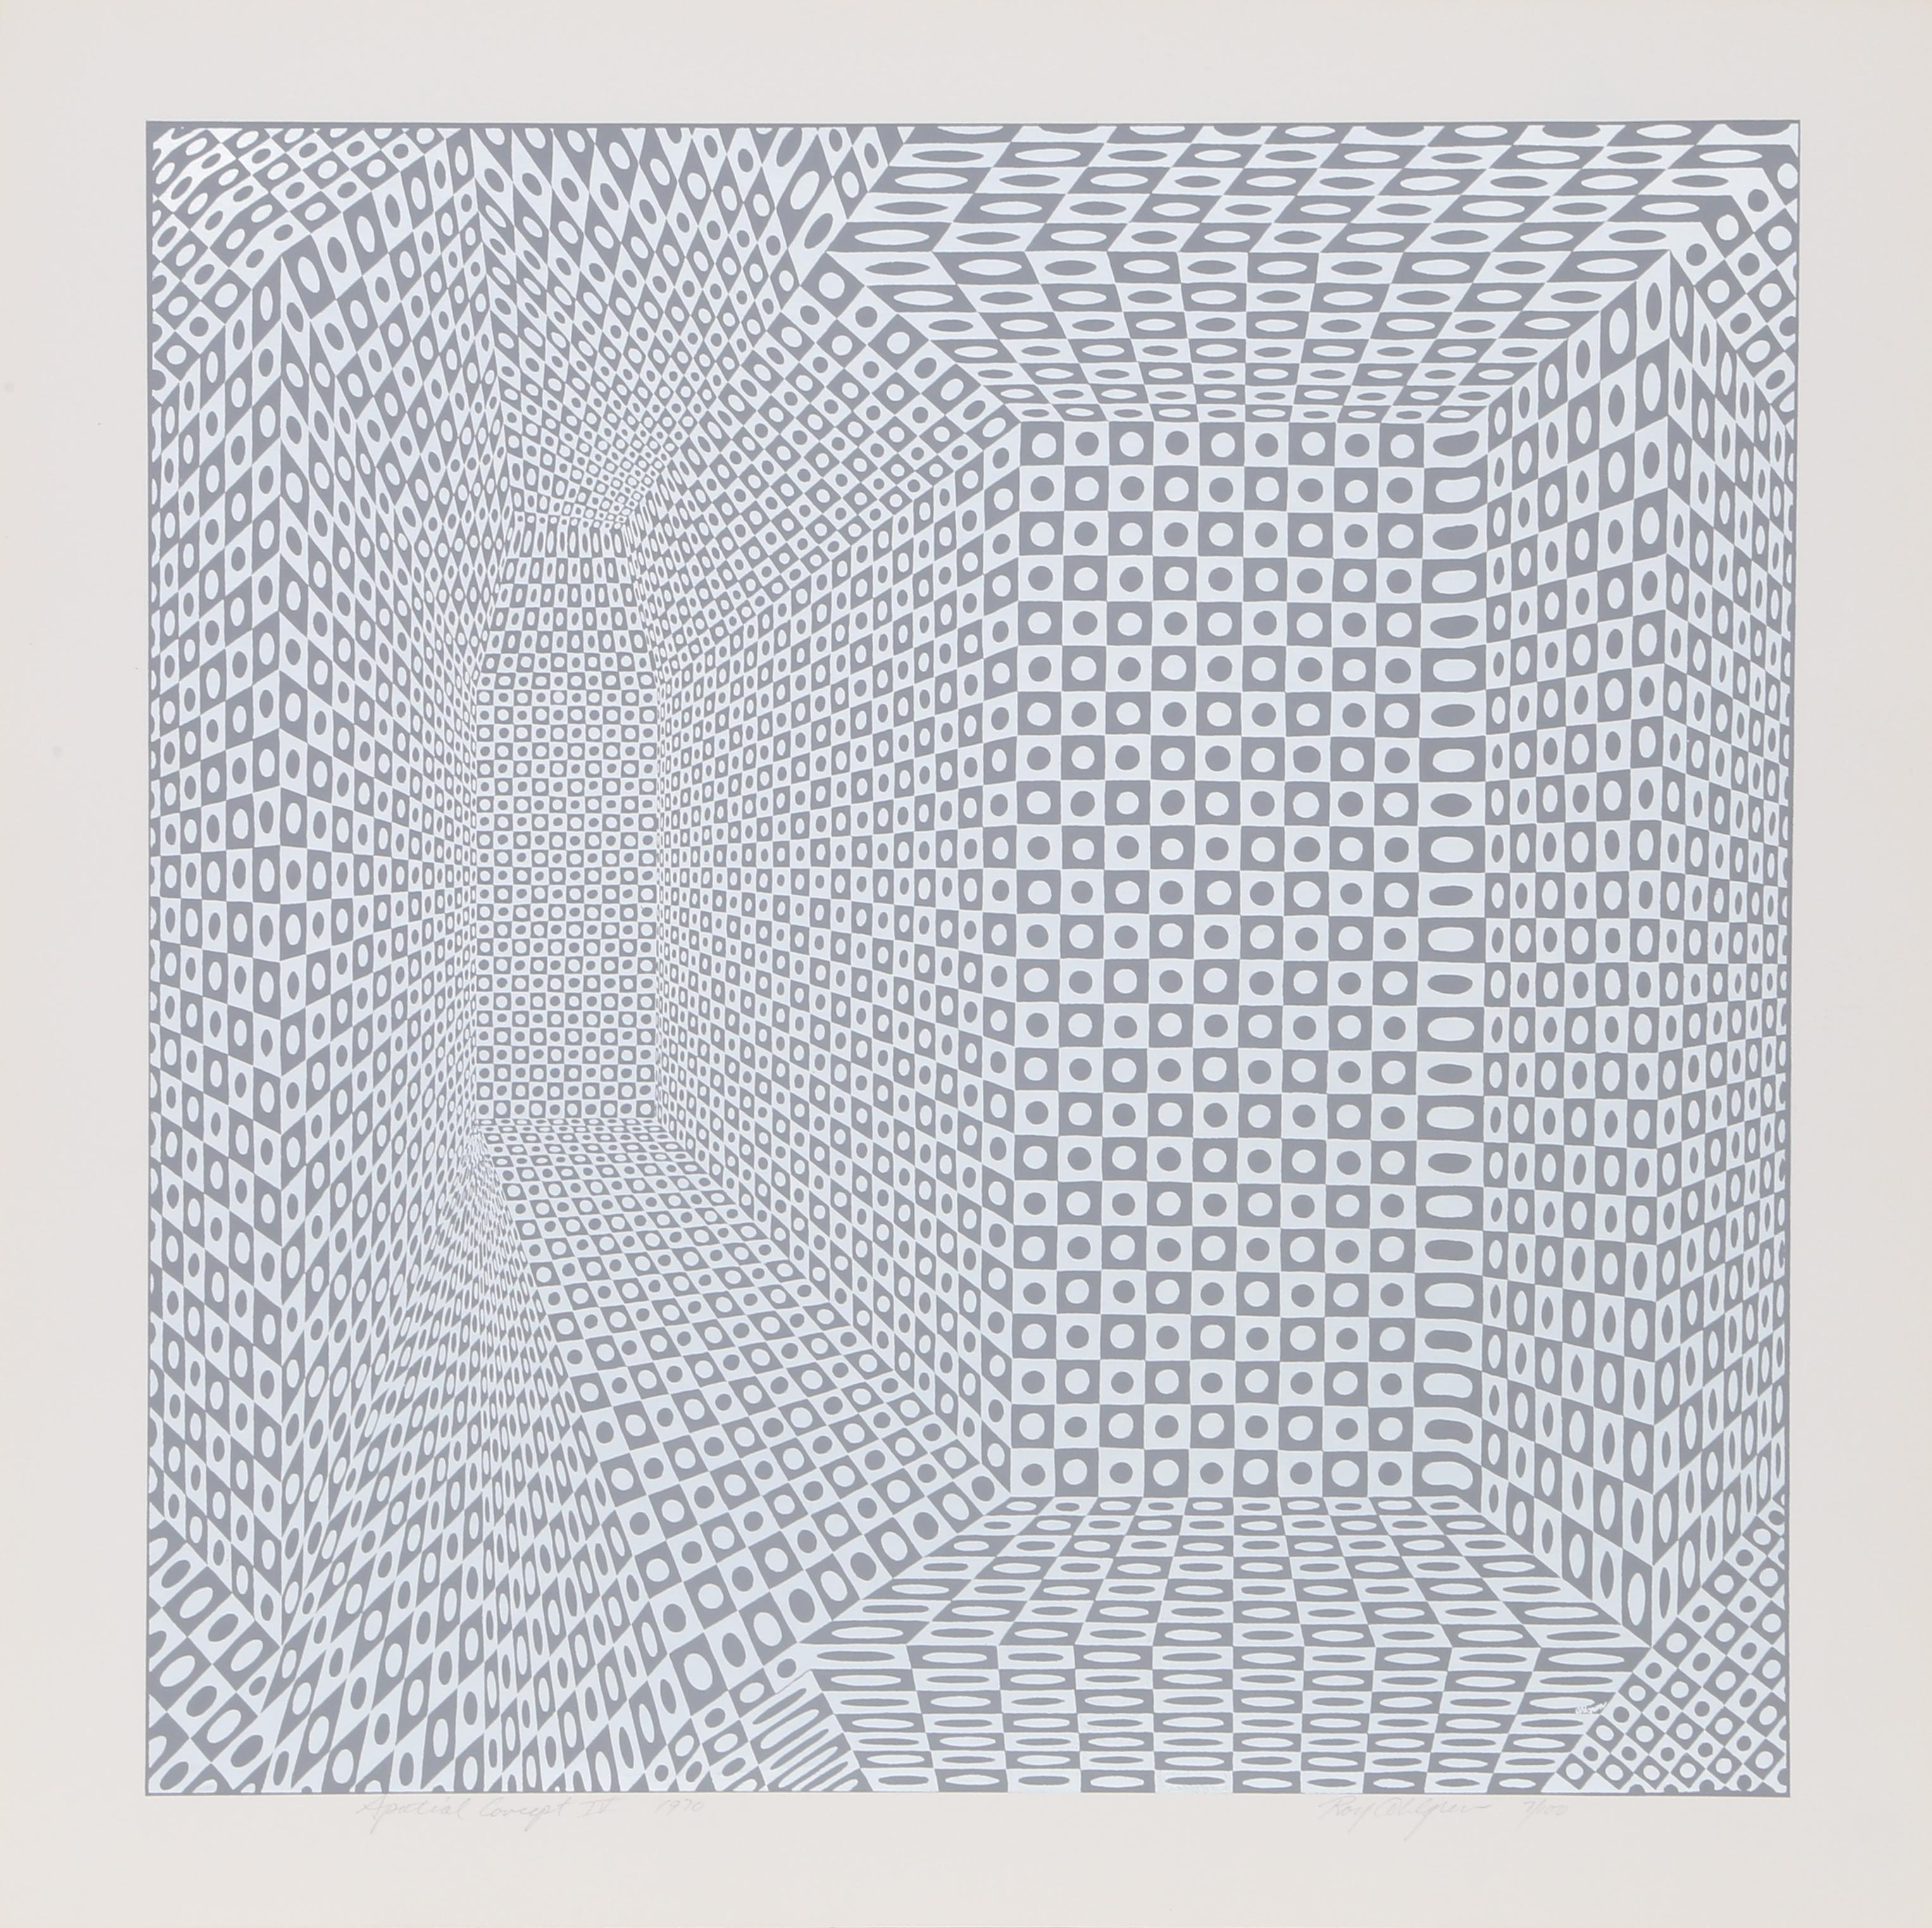 "Spatial Concepts IV", 1970, Serigraph by Roy Ahlgren